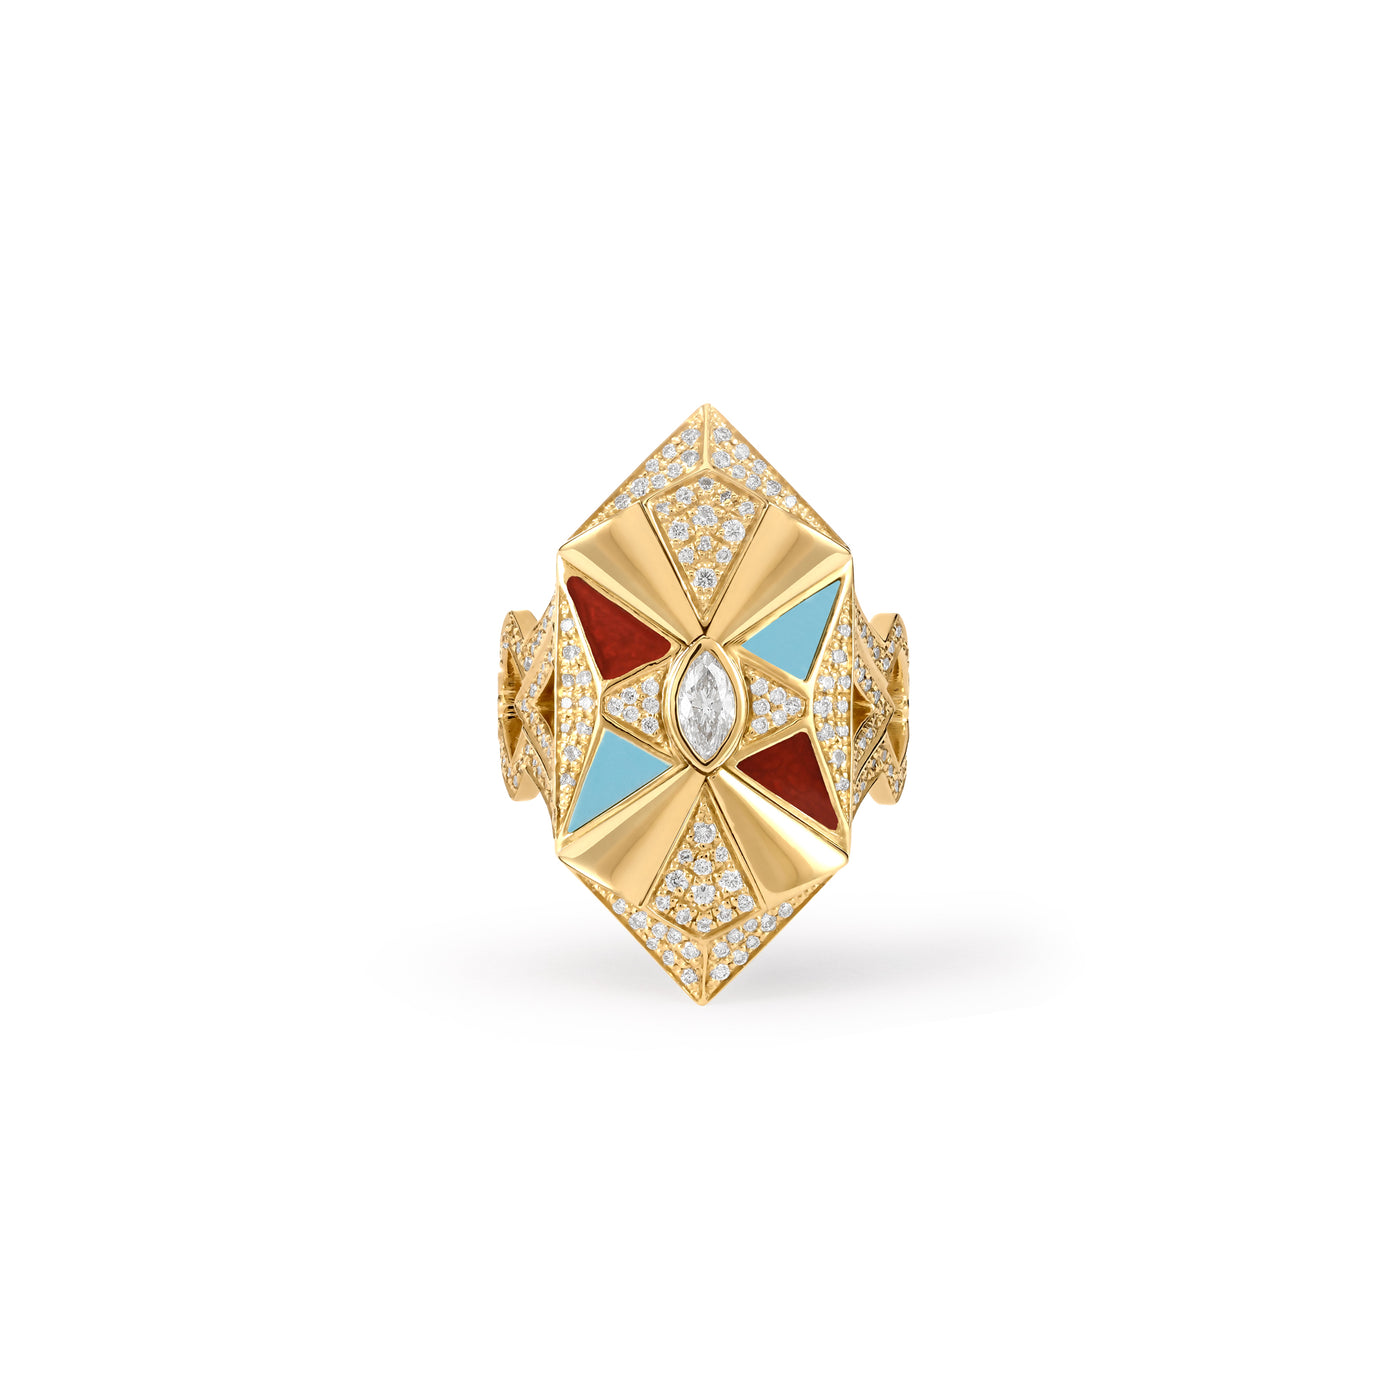 Soit Belle Yellow Gold Diamond Geometric Ring With Turquoise and Carnelian